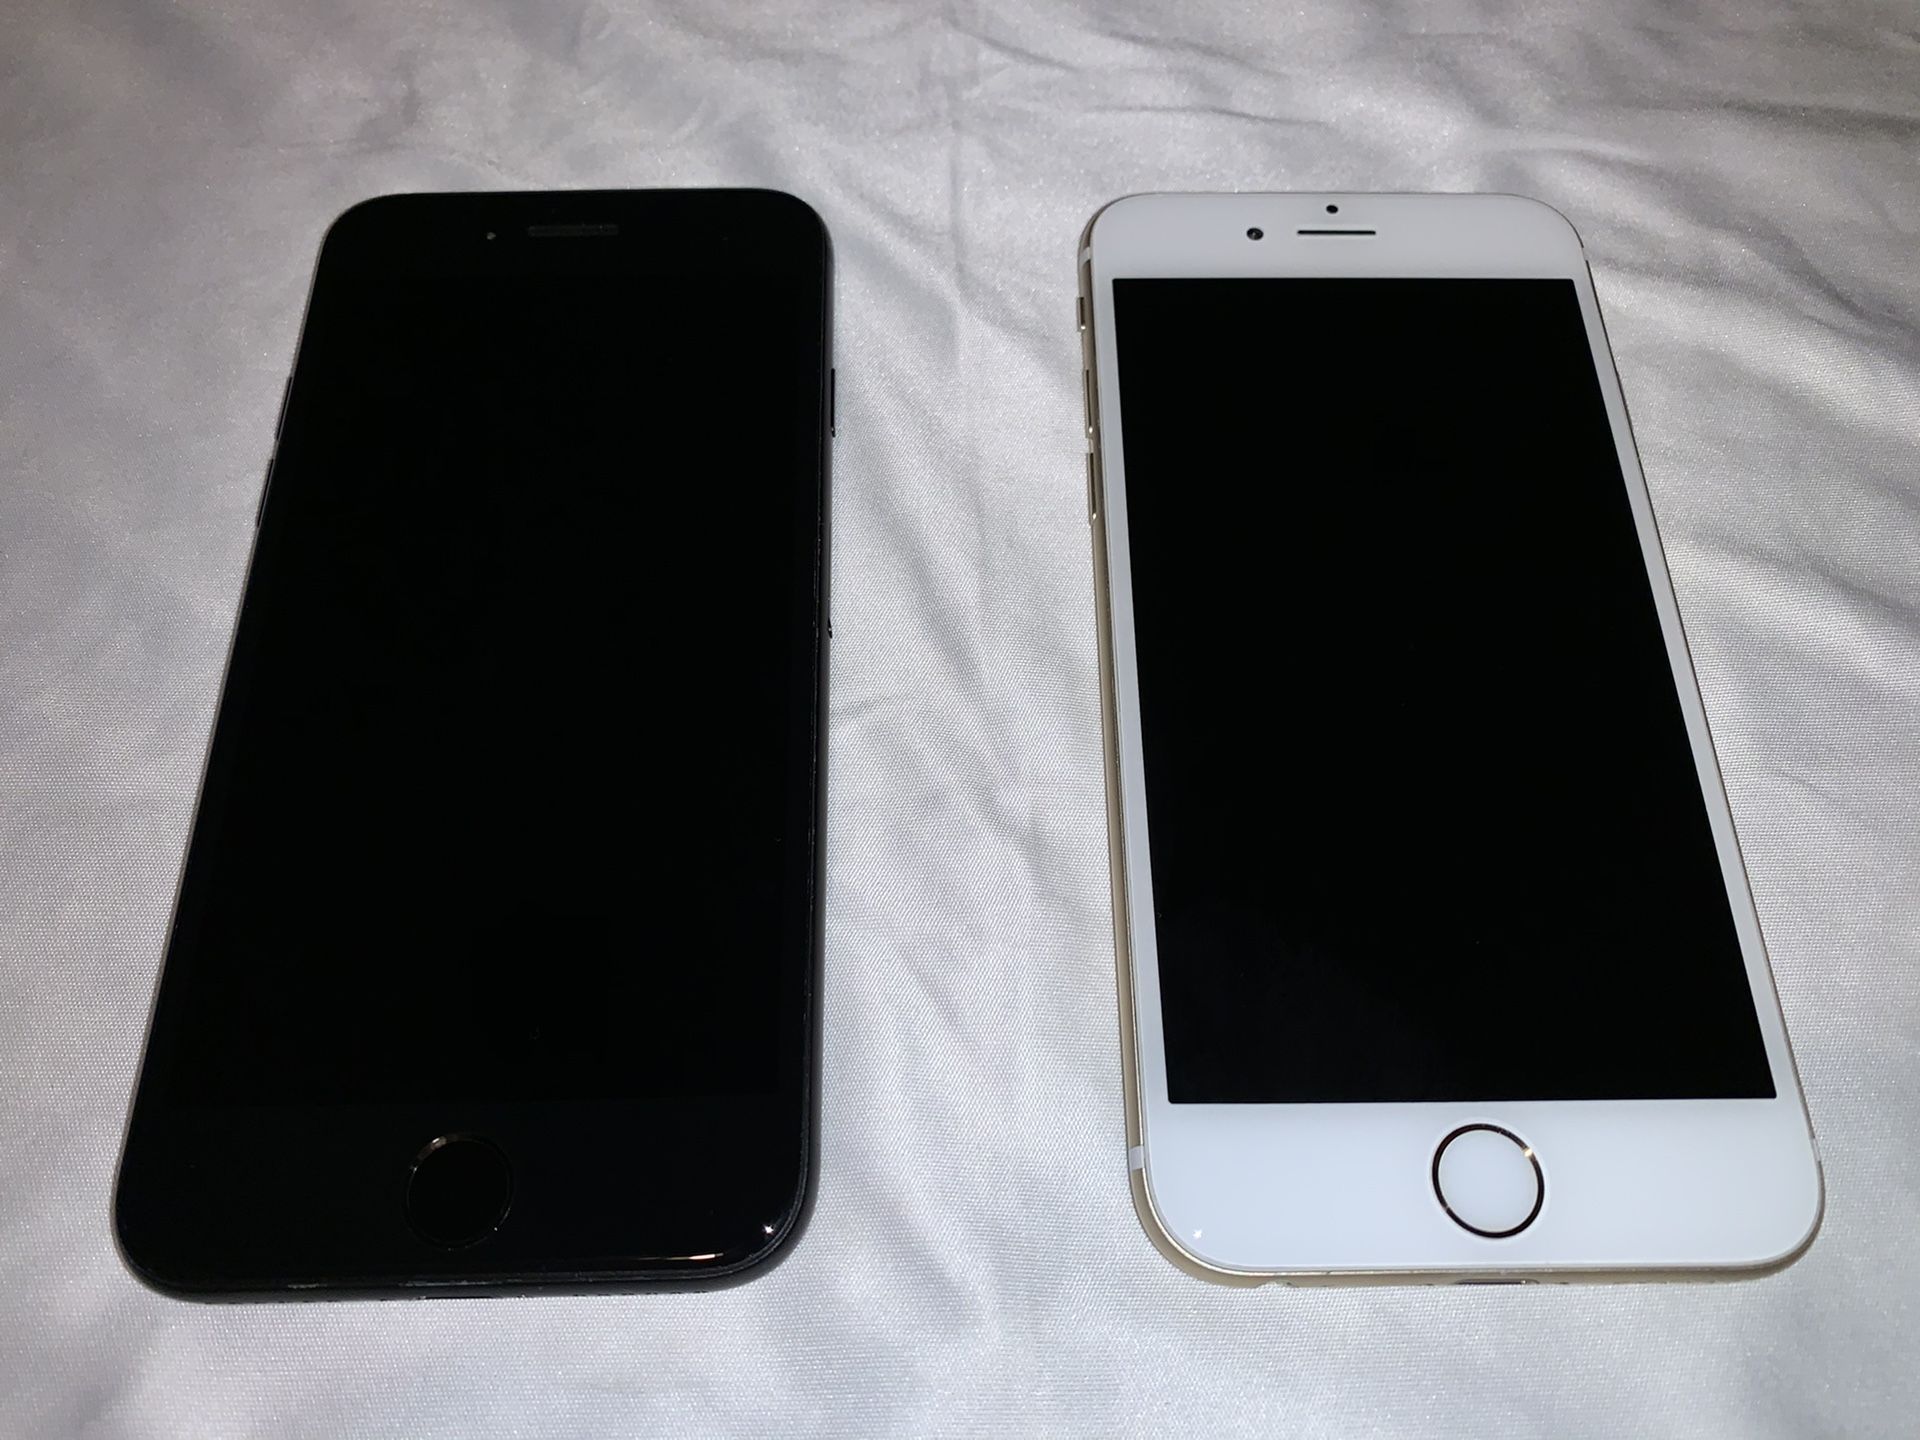 iPhone 7 (A1660) and iPhone 6 (A1549) for sale * iCloud locked*